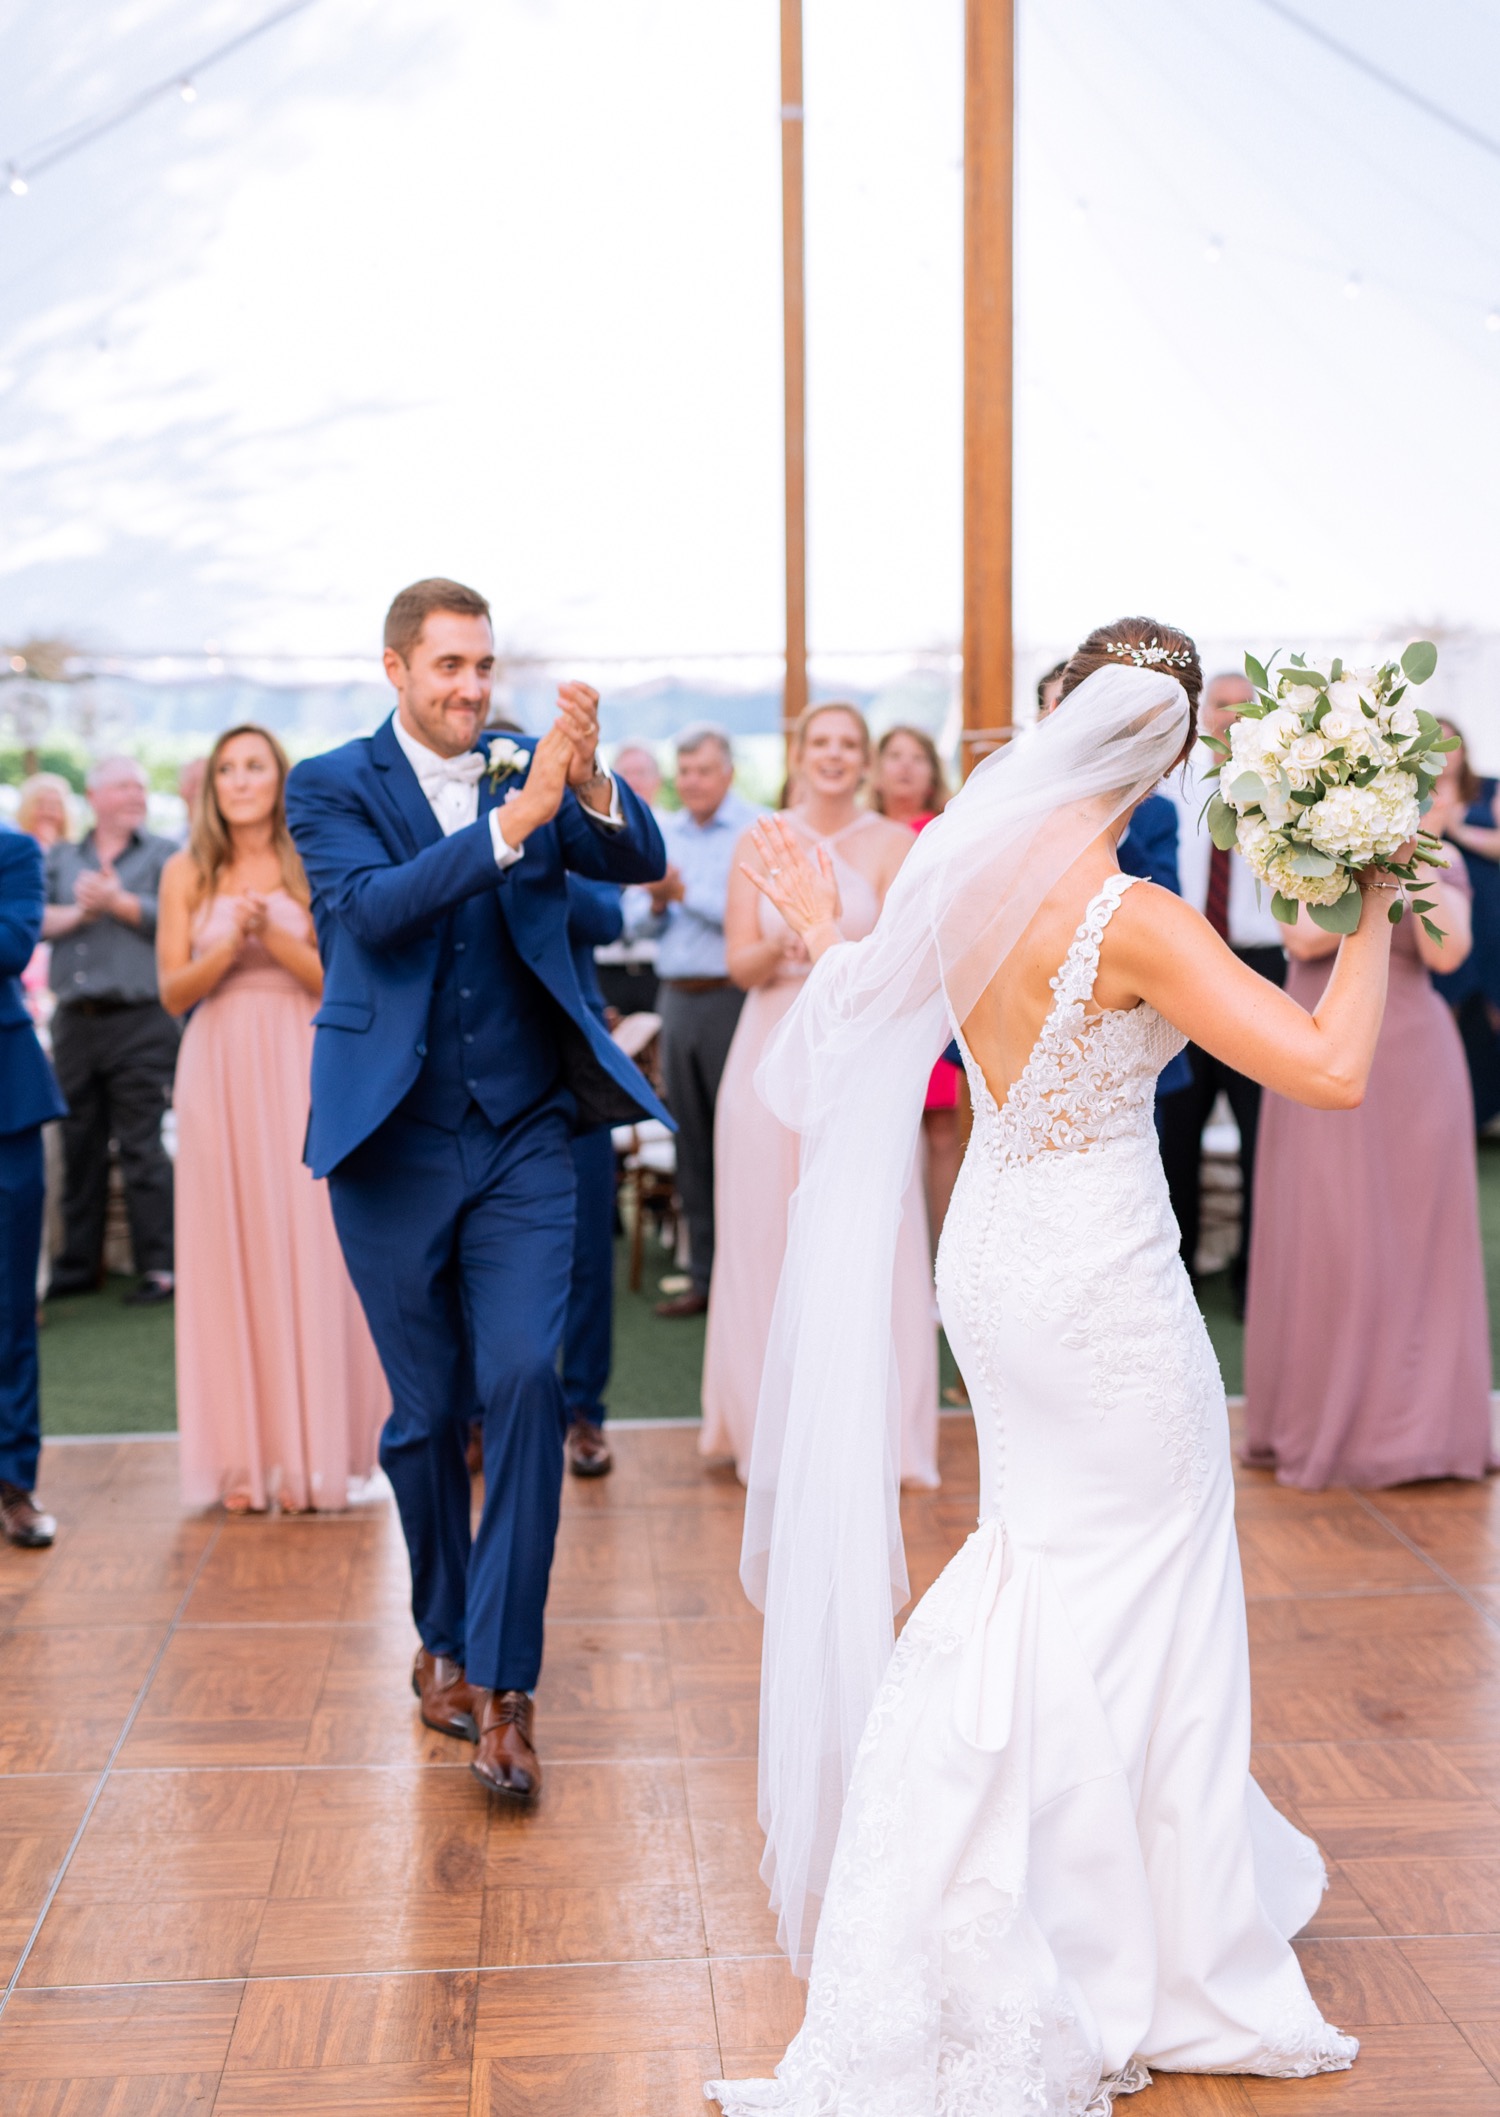 bride and groom celebrate while dancing together during their wedding reception